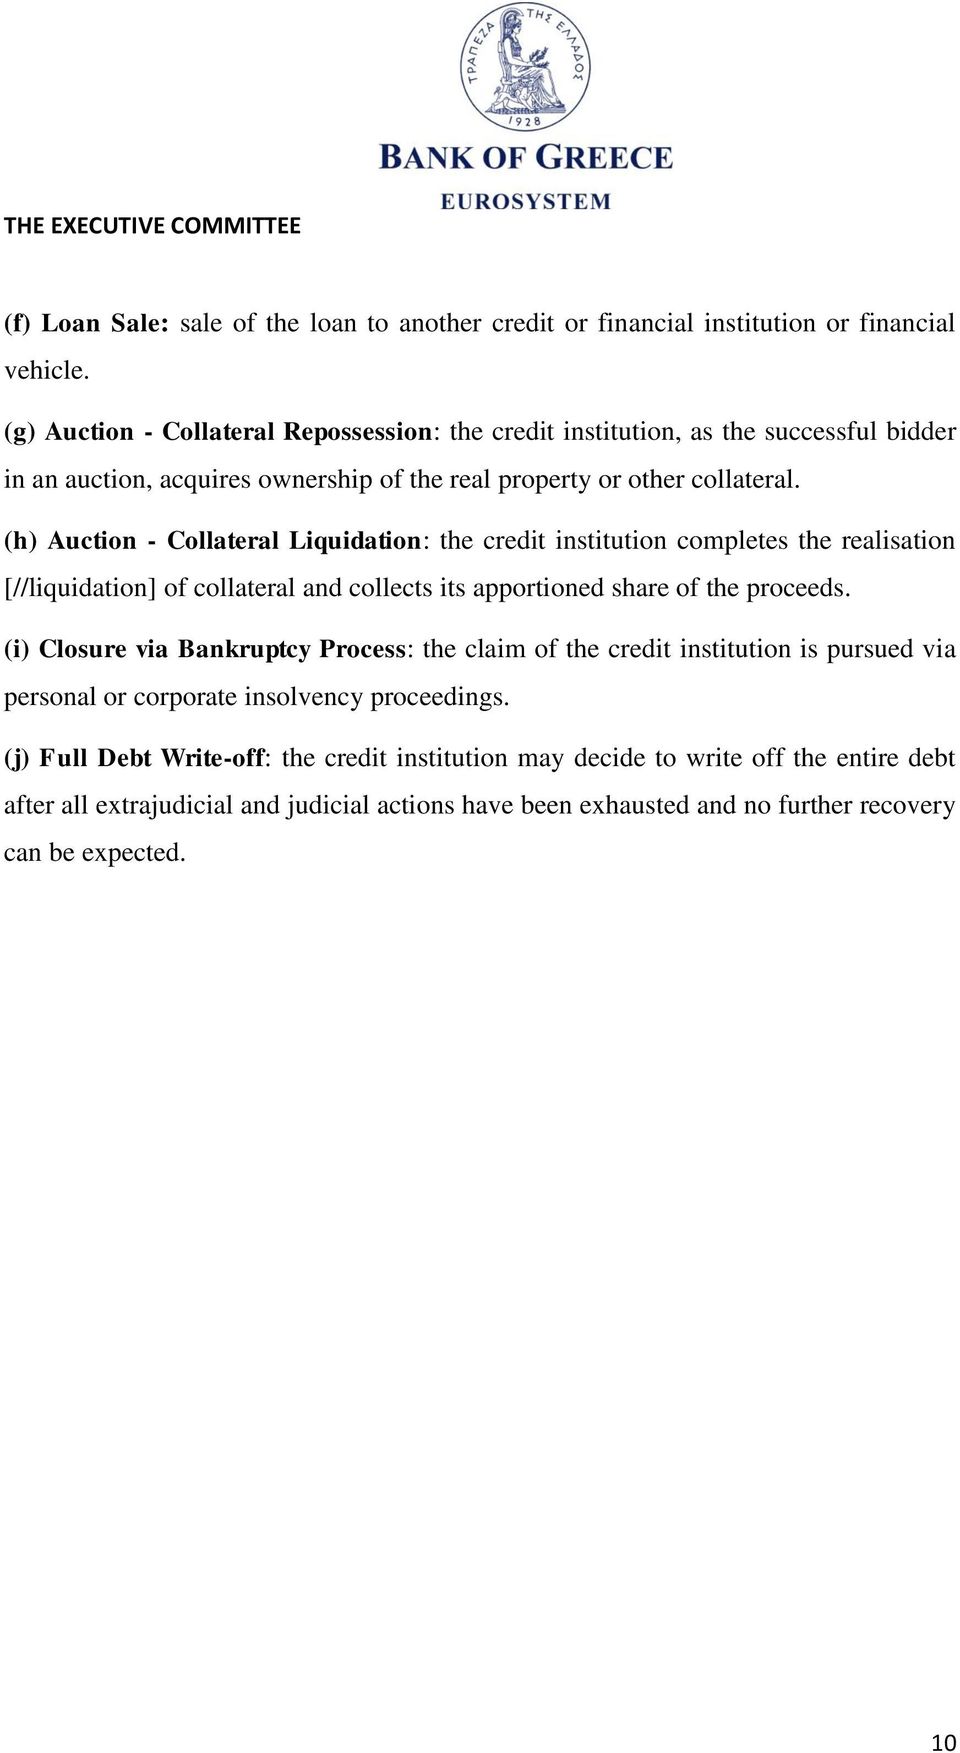 (h) Auction - Collateral Liquidation: the credit institution completes the realisation [//liquidation] of collateral and collects its apportioned share of the proceeds.